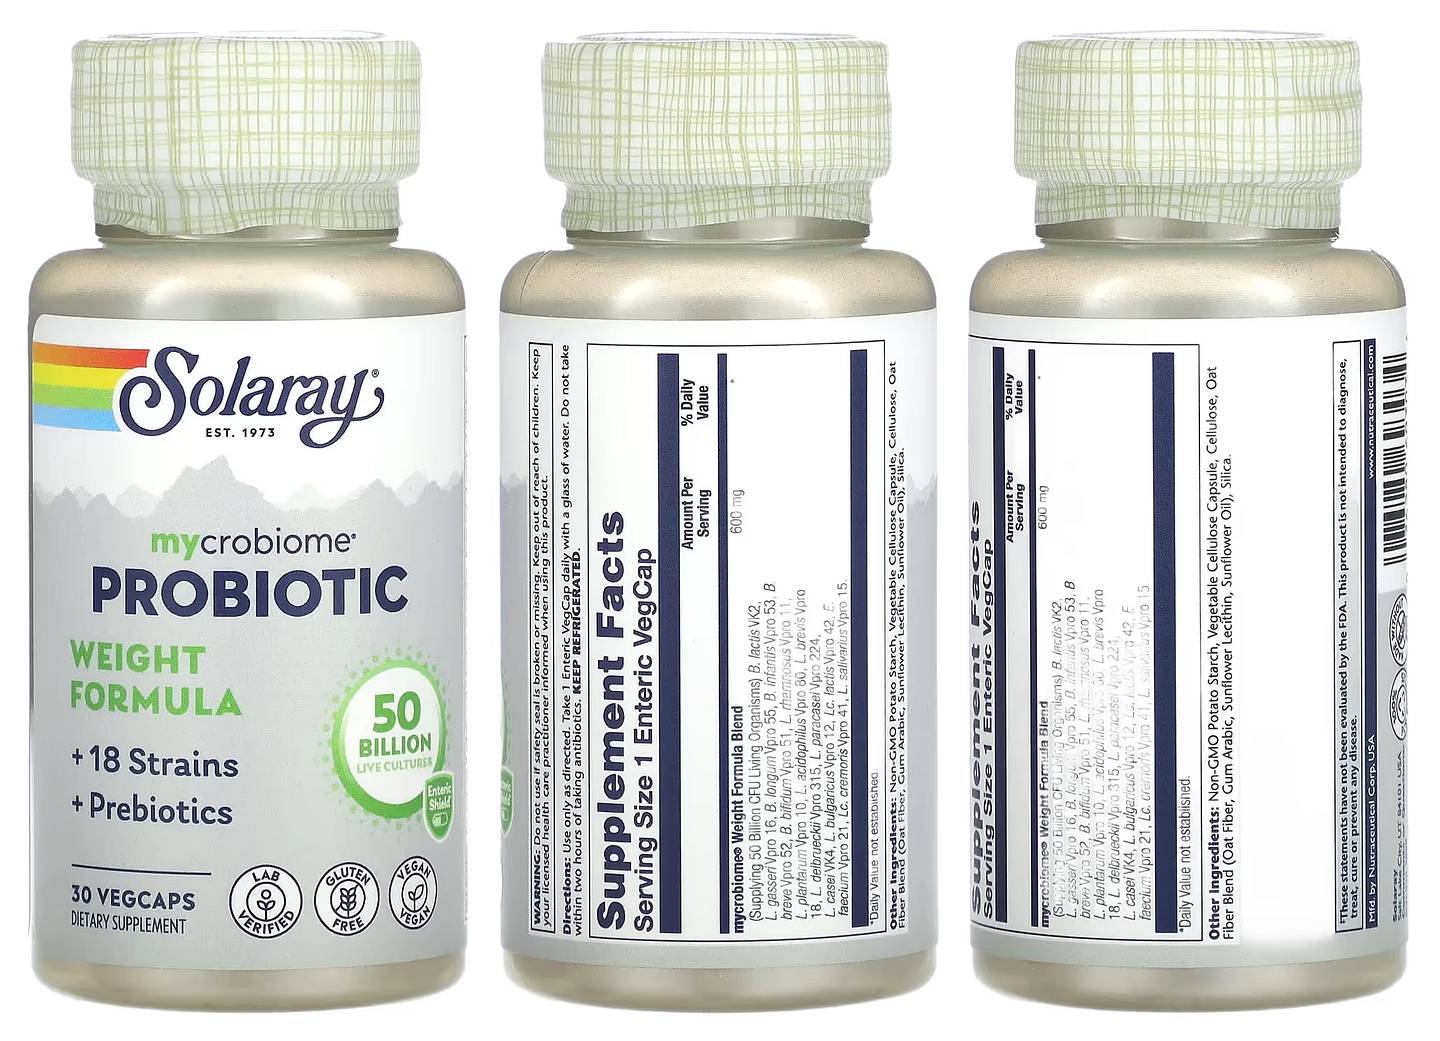 Solaray, Mycrobiome Probiotic Weight Formula packaging